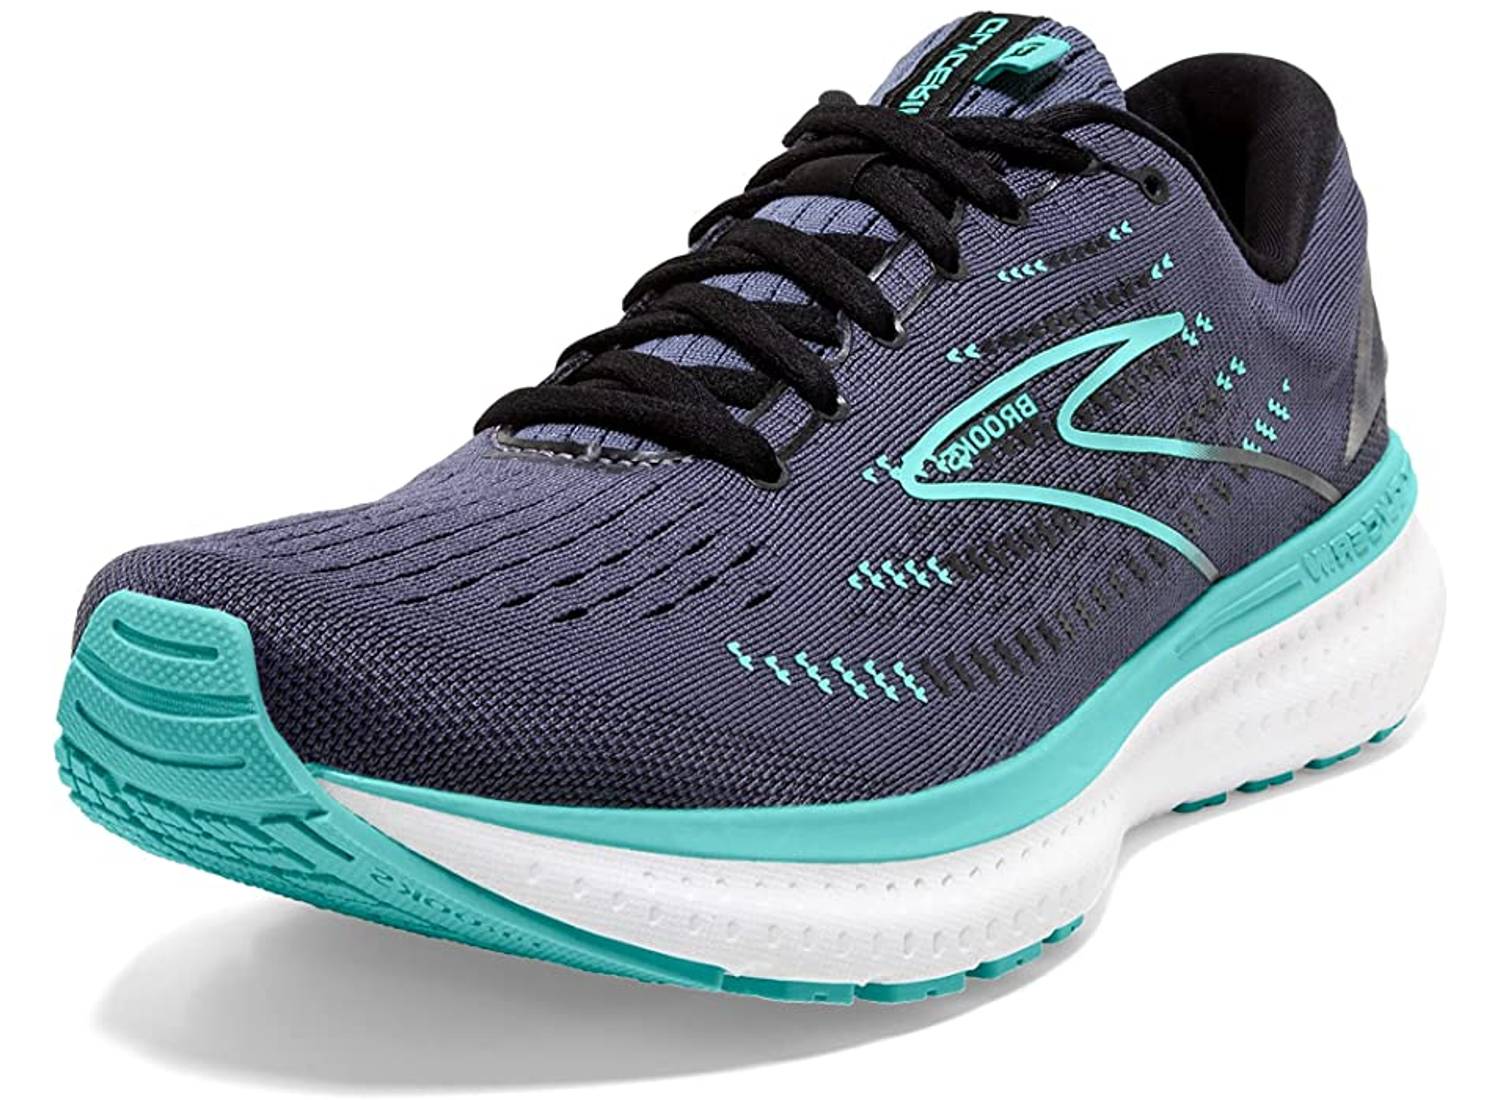 A pair of gray, white and teal running sneakers from Brook's